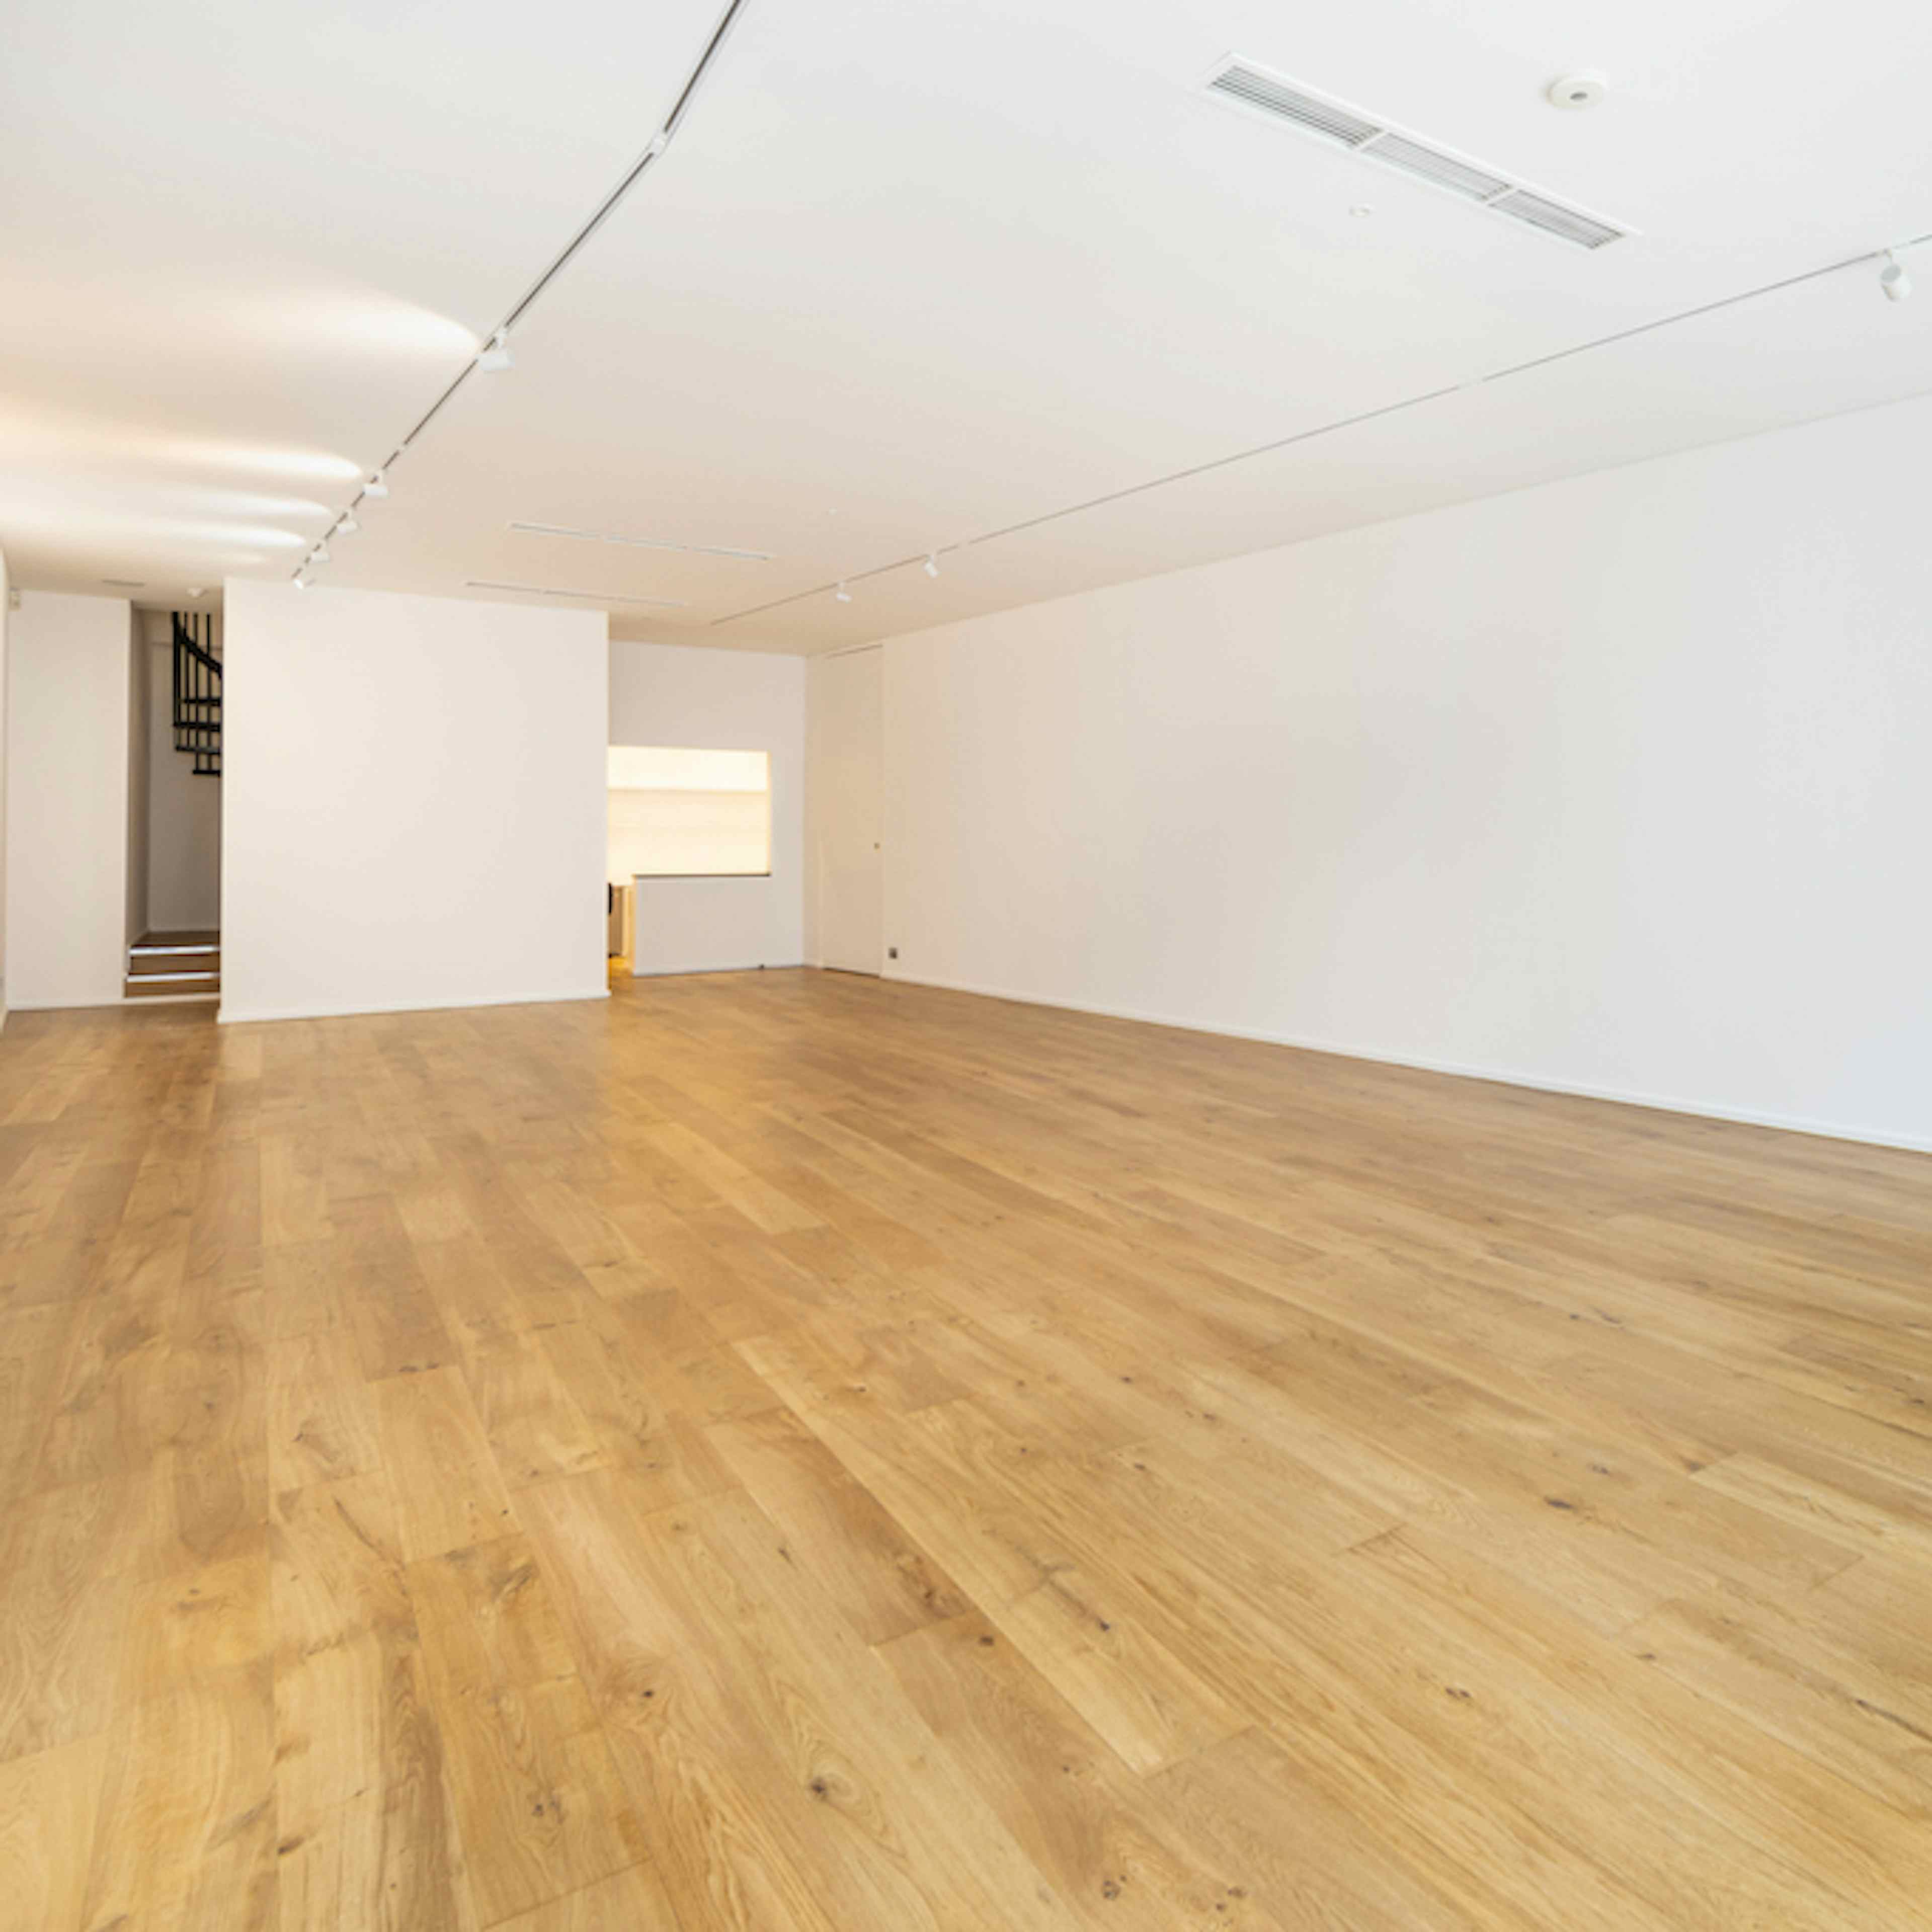 Mayfair Gallery - Whole Venue image 2